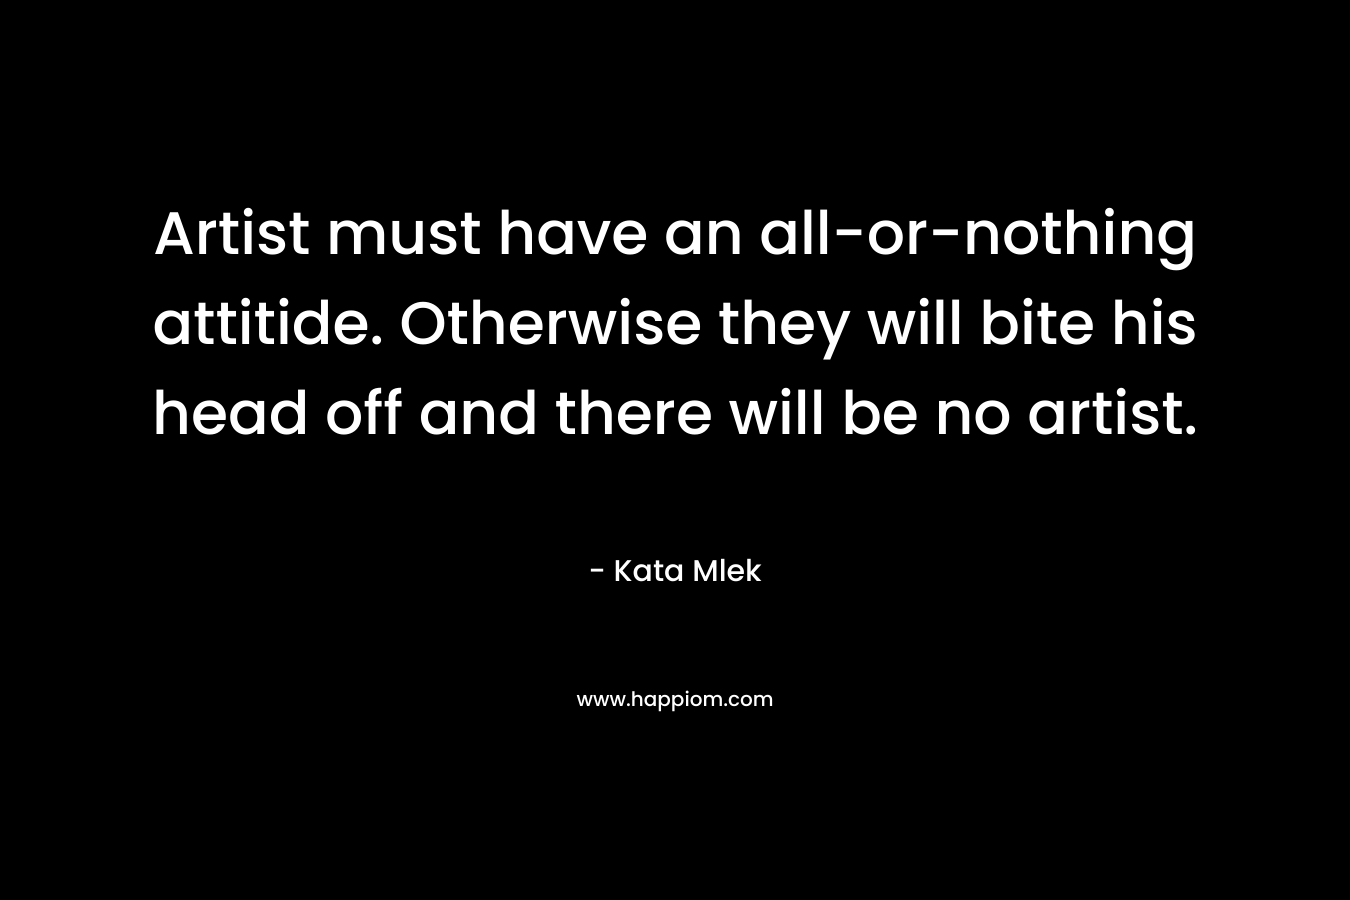 Artist must have an all-or-nothing attitide. Otherwise they will bite his head off and there will be no artist. – Kata Mlek